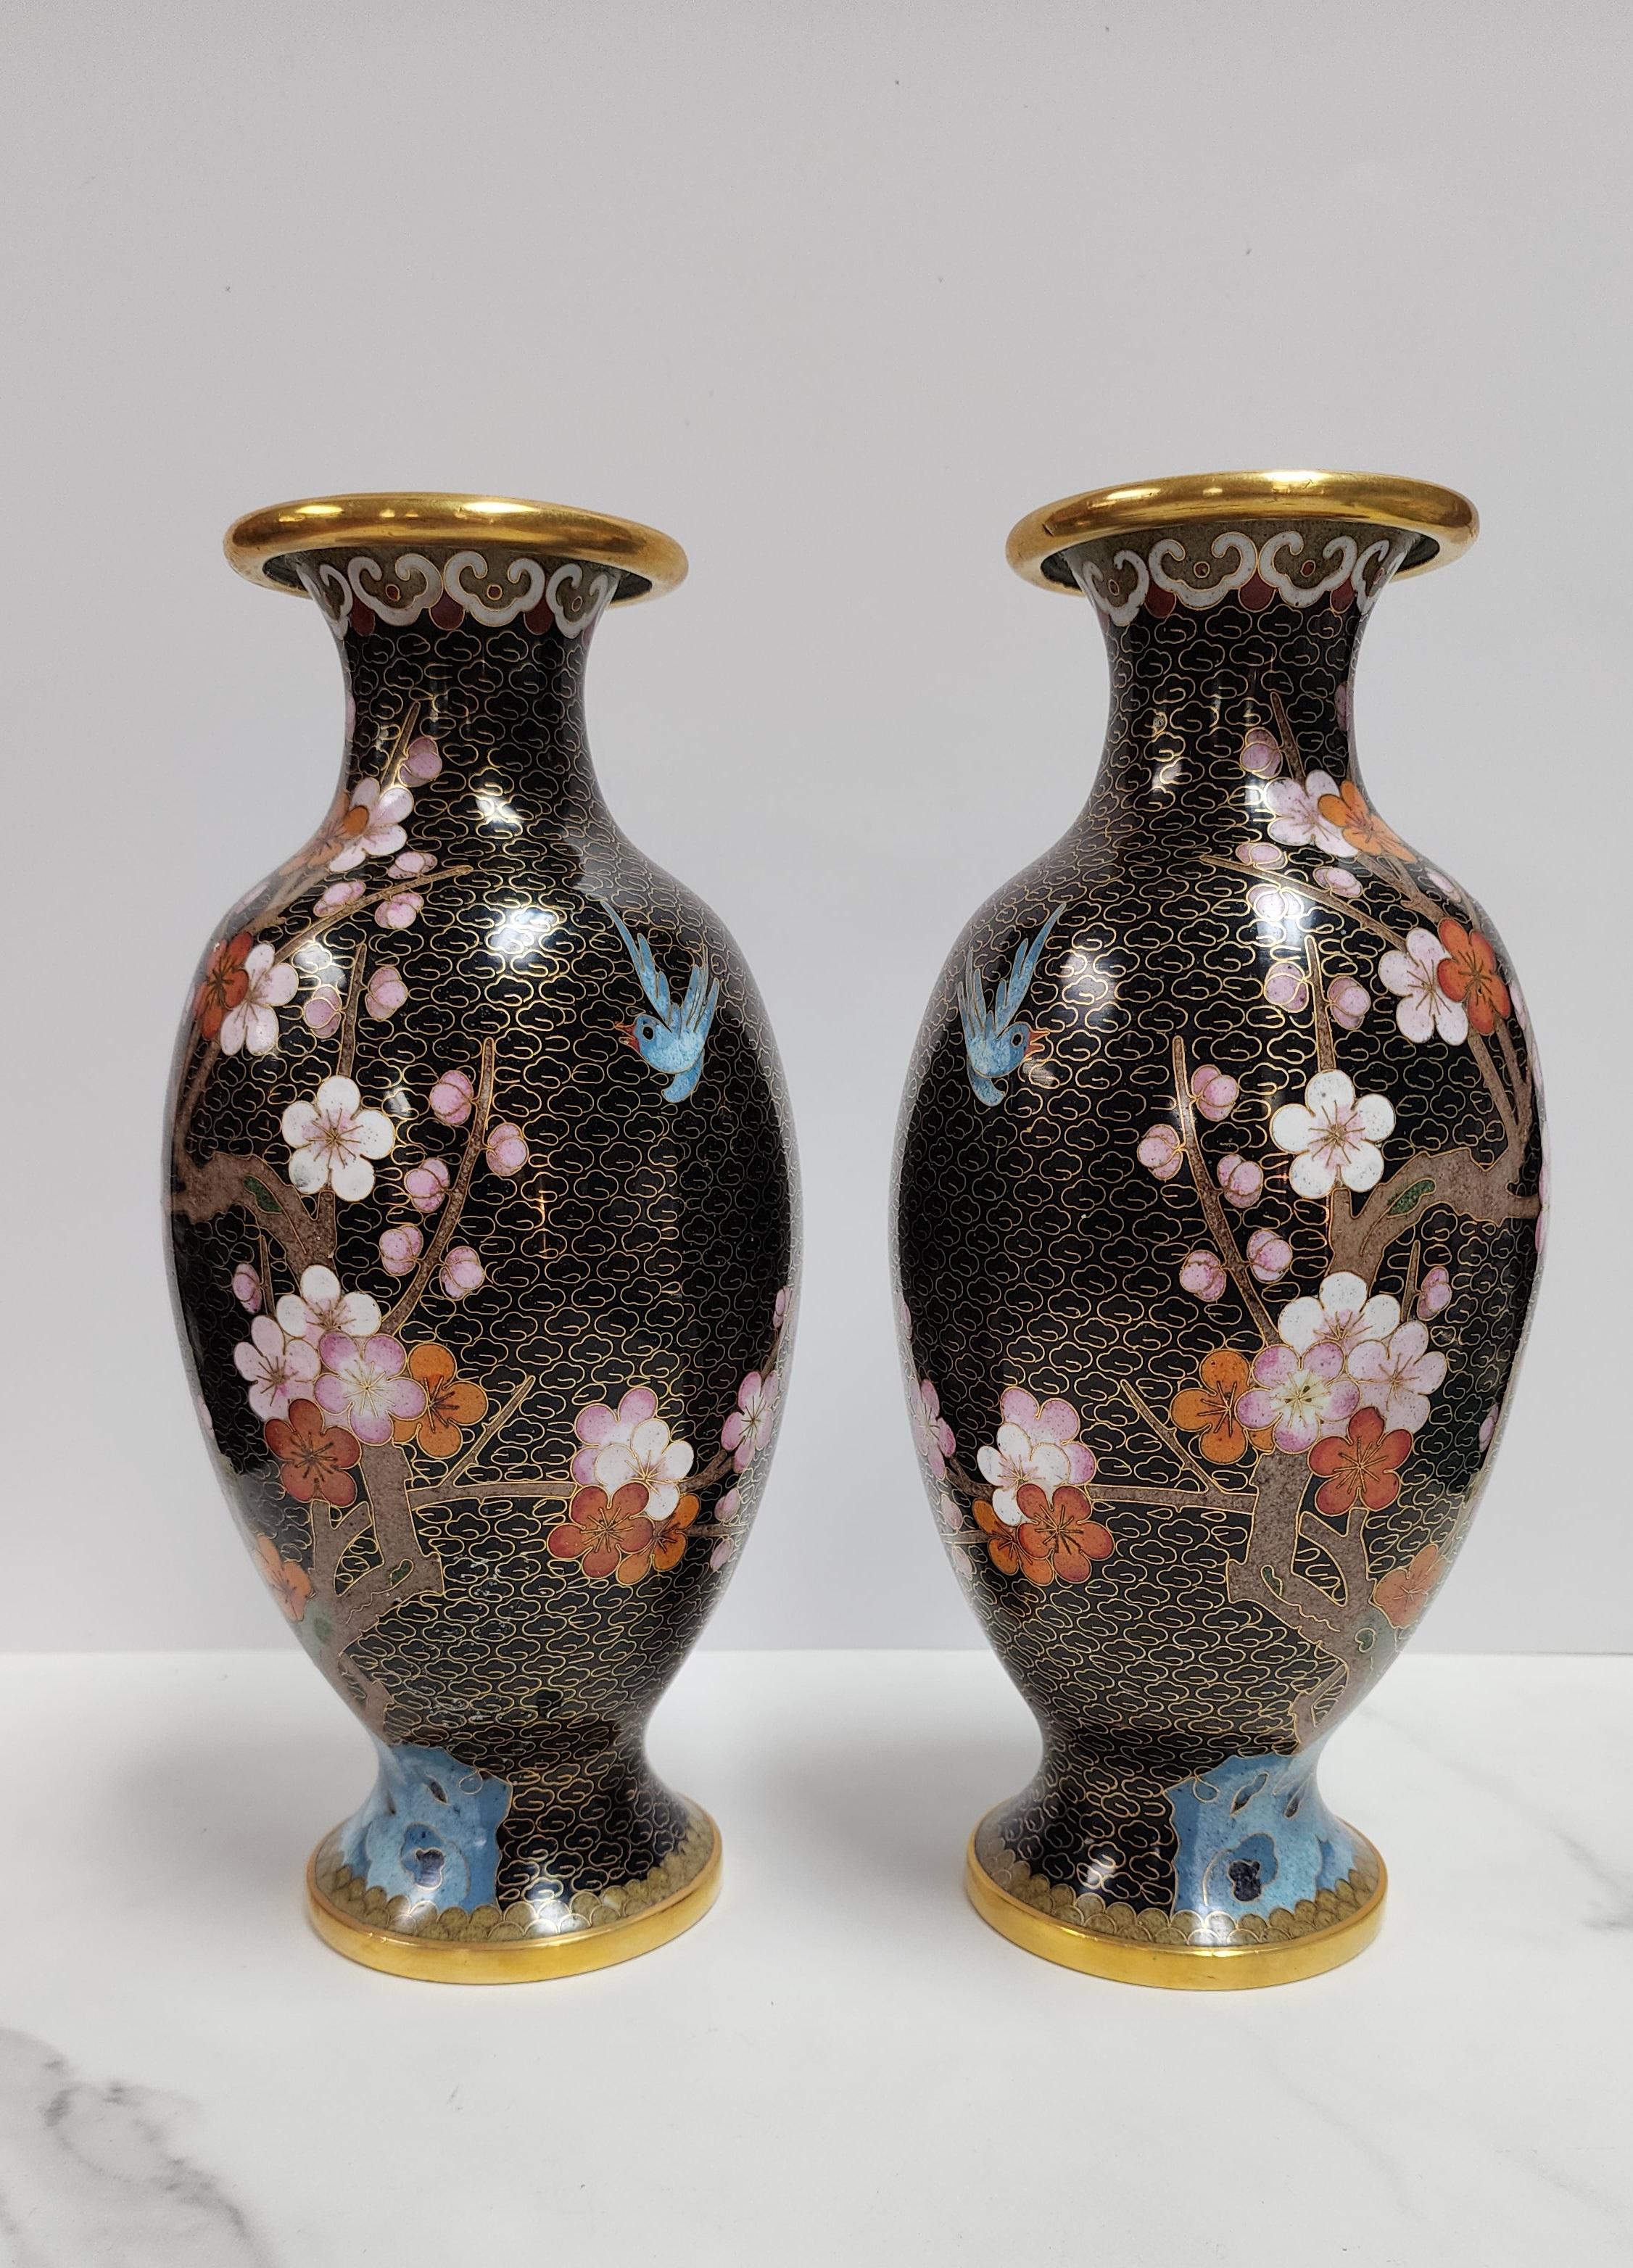 Pair of Mirrored Chinese Cloisonne Enamel Vase with Flower and Bird Motif For Sale 5